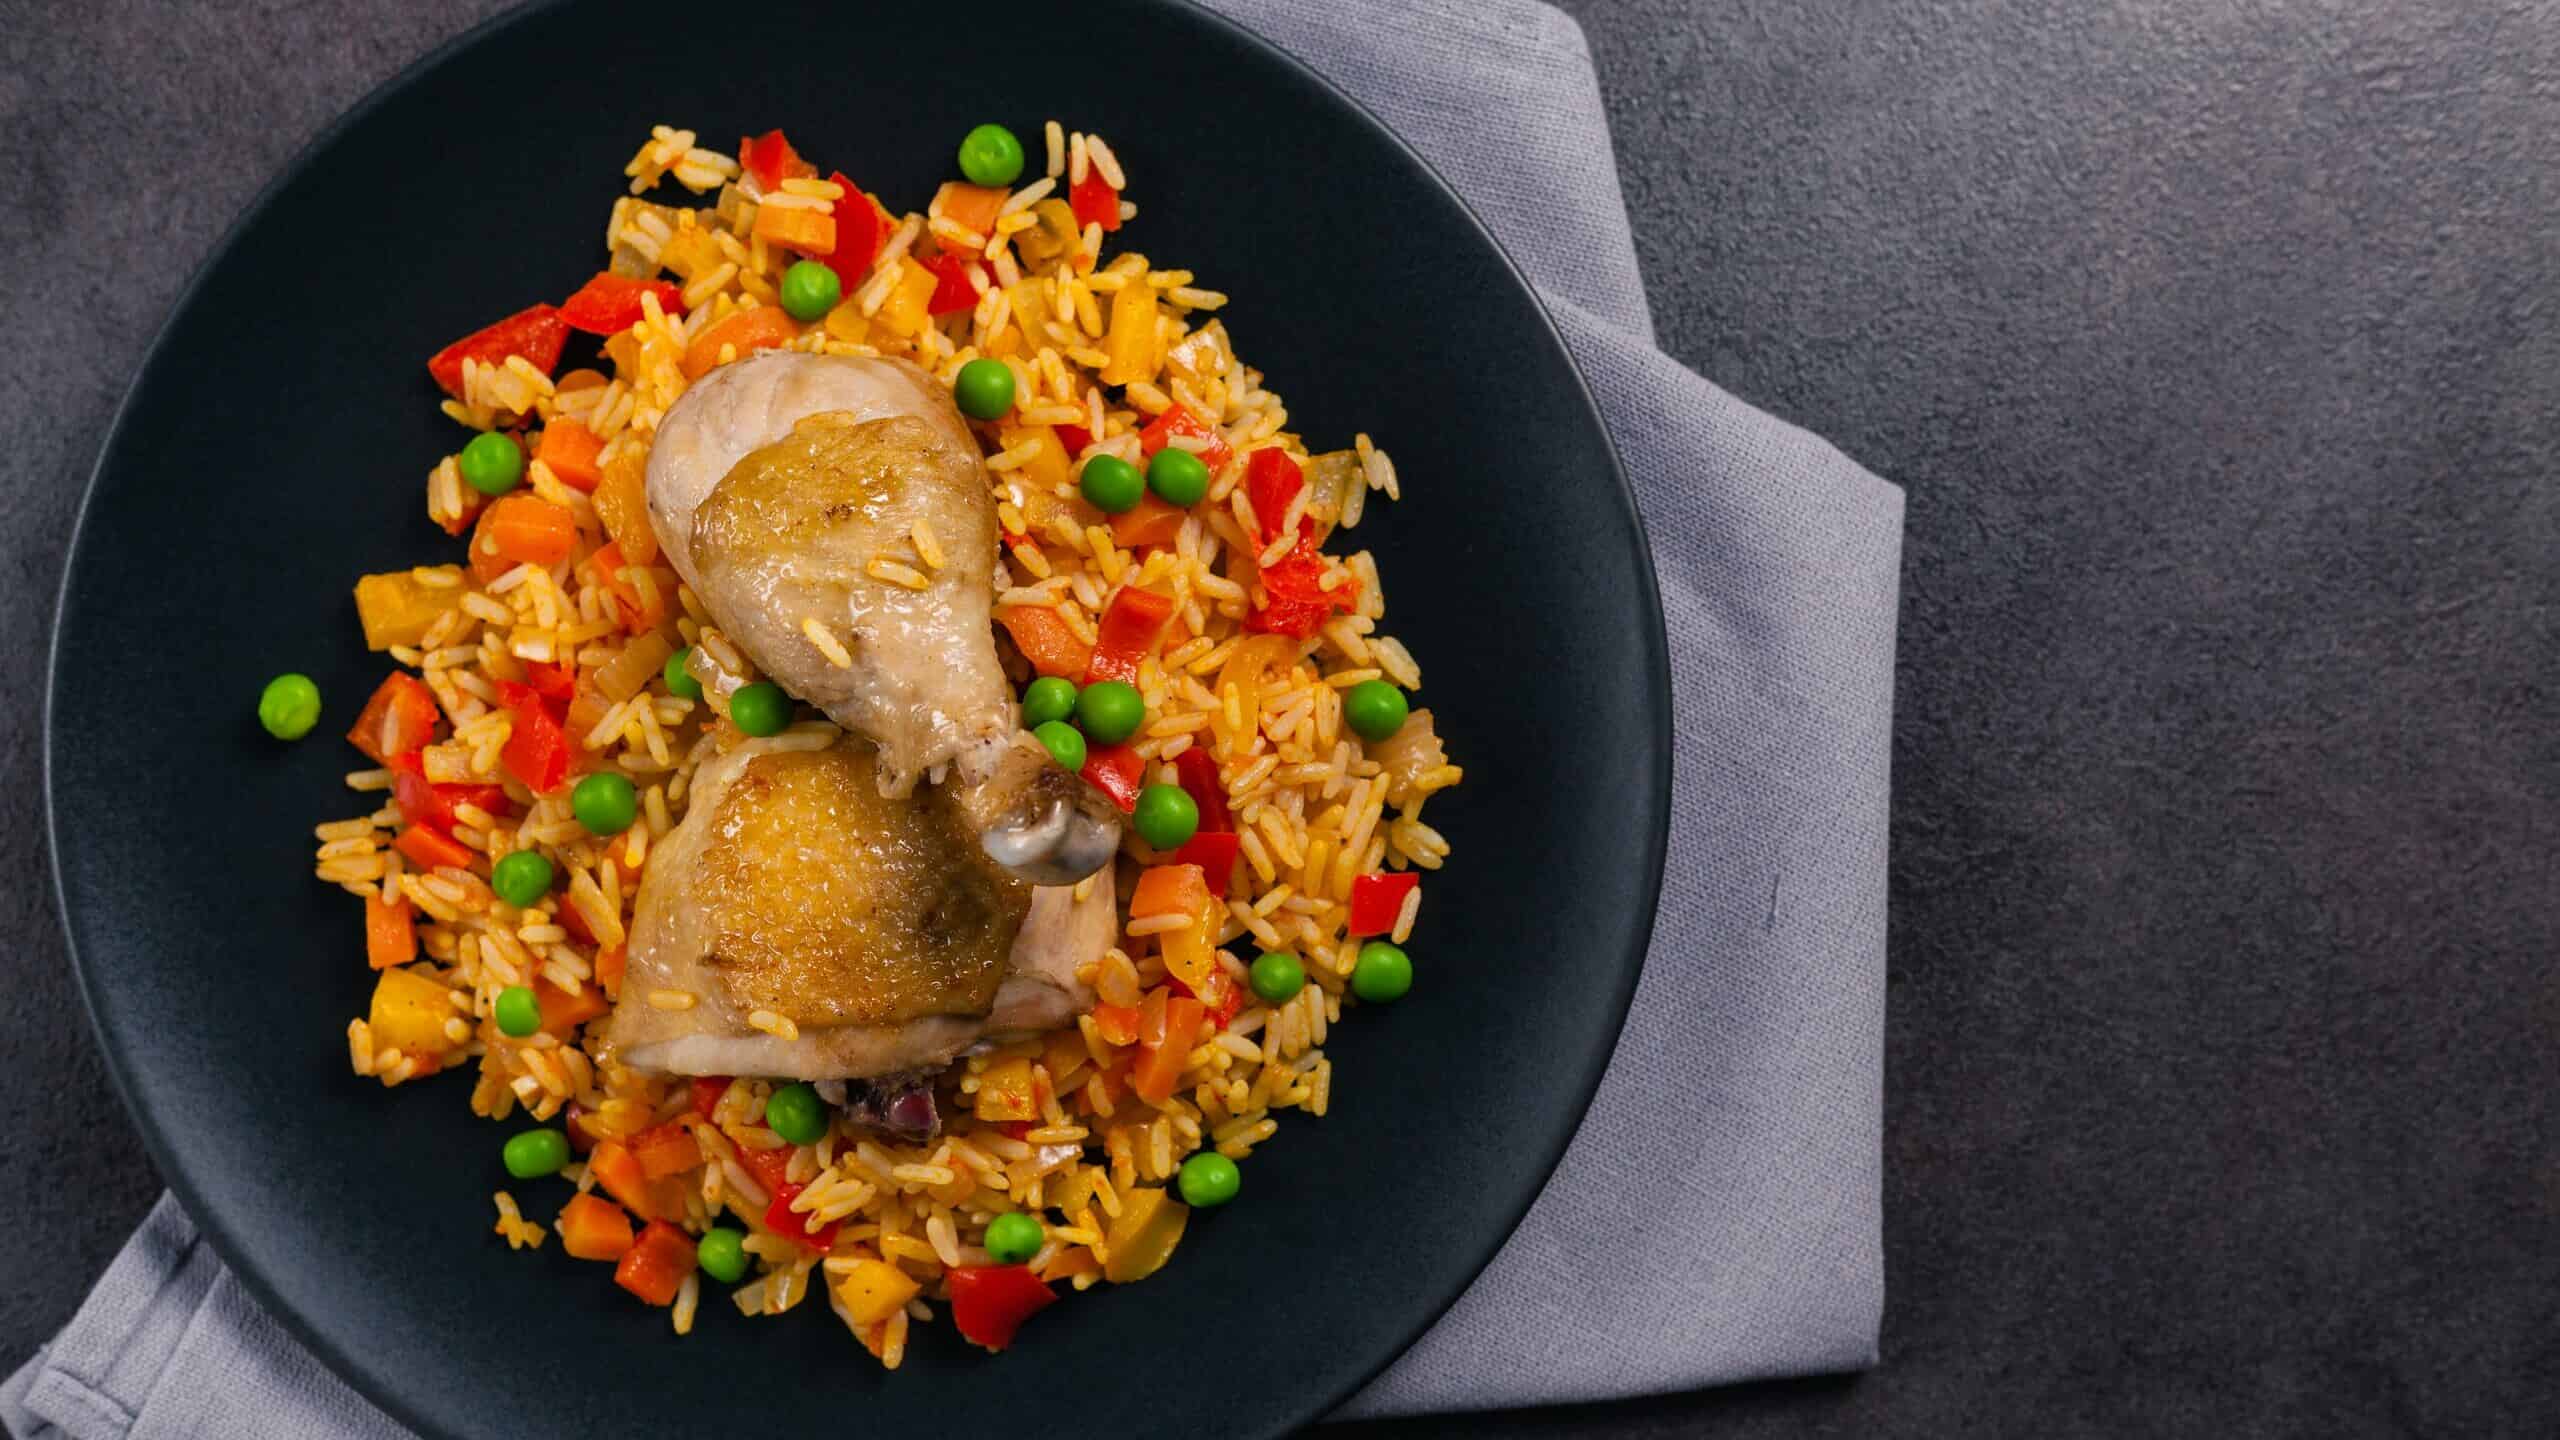 Arroz con pollo. Baked pieces of chicken with bone, rice with paprika and peas. Black background. Served on black plate or spanish pan.